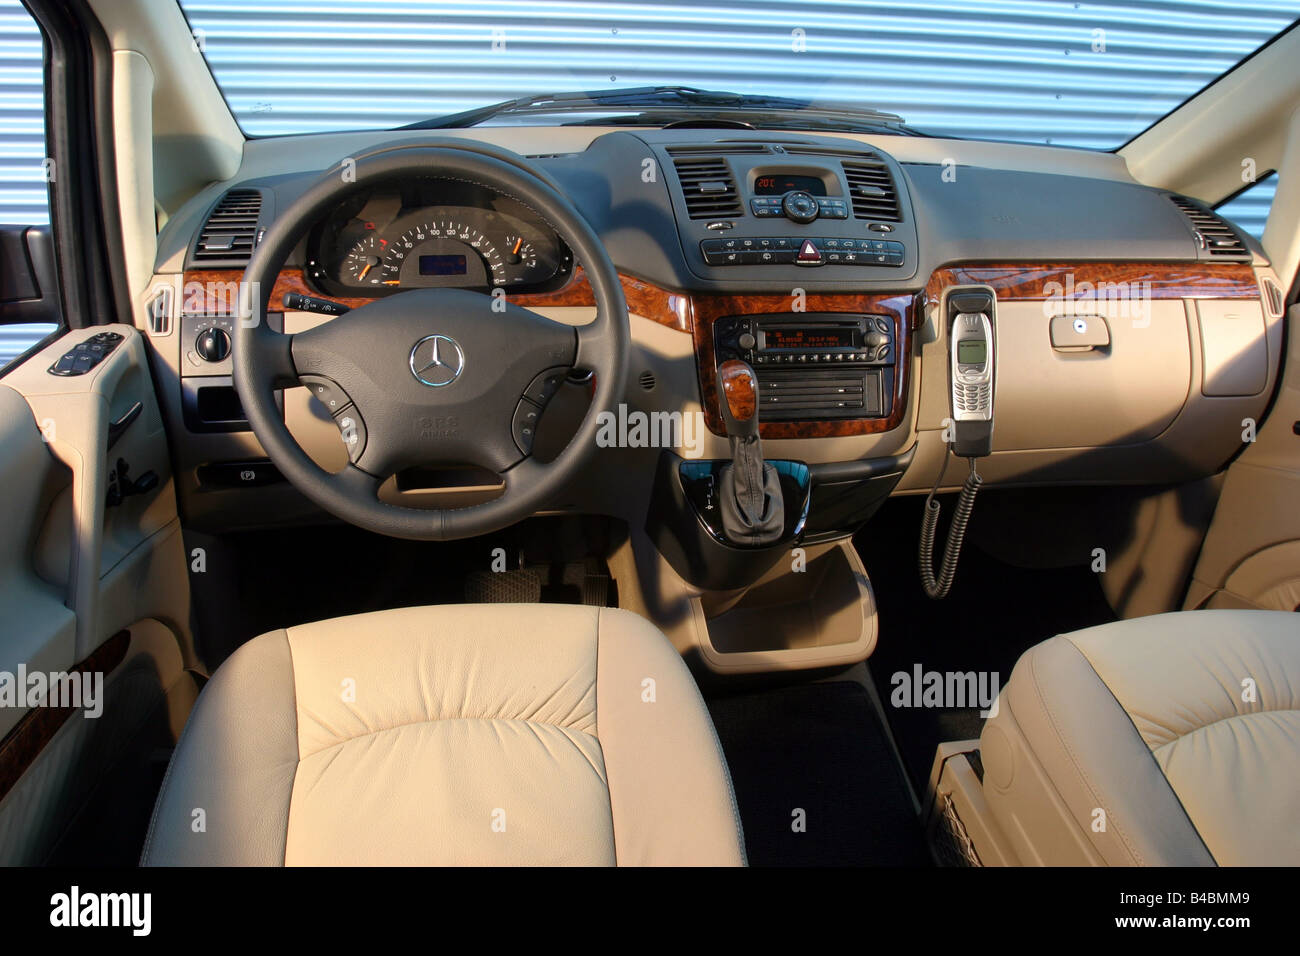 Car, Mercedes Viano 2.2 CDi lang, Van, model year 2003-, ruby colored,  FGHDS, interior view, Interior view, Cockpit, technique/a Stock Photo -  Alamy